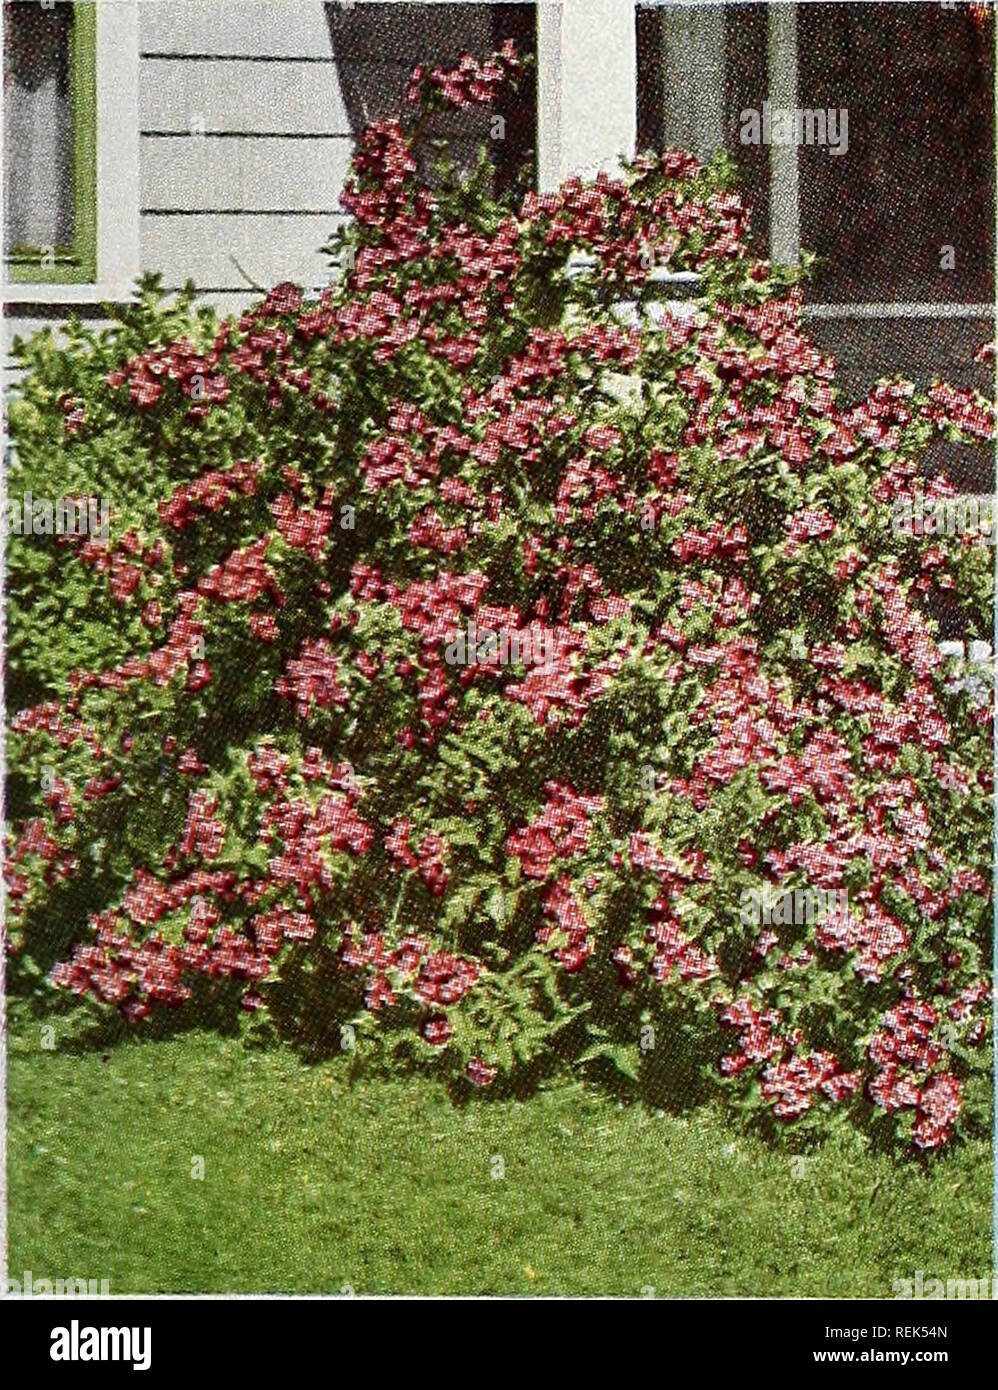 . C. M. Hobbs &amp; Sons Incorporated. Nurseries Horticulture Catalogs; Evergreens Catalogs; Fruit trees Catalogs; Climbing plants Catalogs; Shrubs Catalogs; Vegetables Catalogs. Viburnum Tamarix TAMARIX africana. 10 to 15 ft. Graceful upright shrub of few branches with fine feathery foliage not unlike the evergreen variety of Junipers. Delicate small pink flowers in May. Very useful as a specimen or in a group planting. T. hispida. Not as large a grower as africana, reaching a height not much greater than 8 feet, and having similar fine foliage and flowers. Viburnum - SnowbatE One of the real Stock Photo